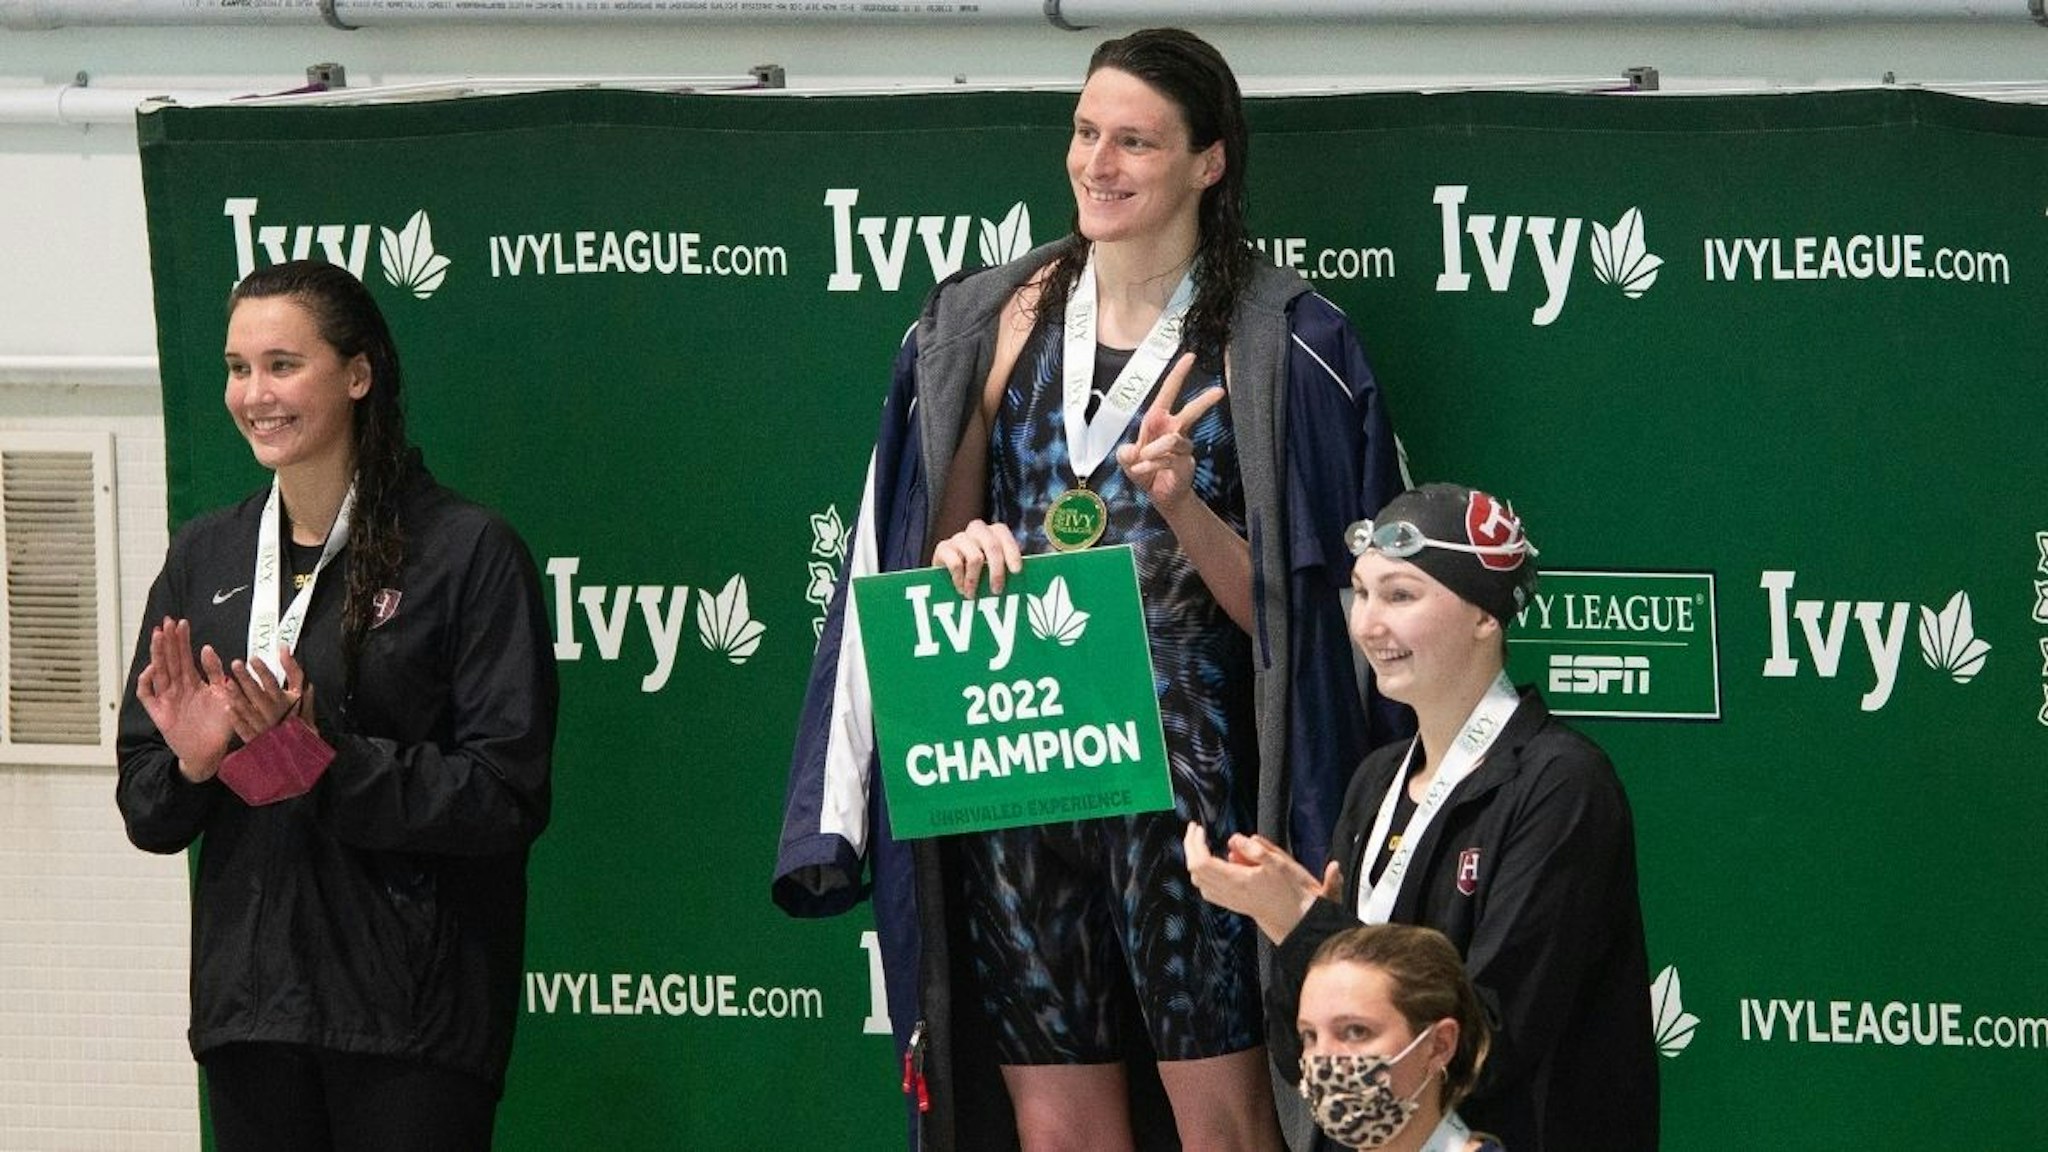 University of Pennsylvania swimmer Lia Thomas smiles on the podium after winning the 200 yard freestyle during the 2022 Ivy League Women's Swimming and Diving Championships at Blodgett Pool on February 18, 2022 in Cambridge, Massachusetts.